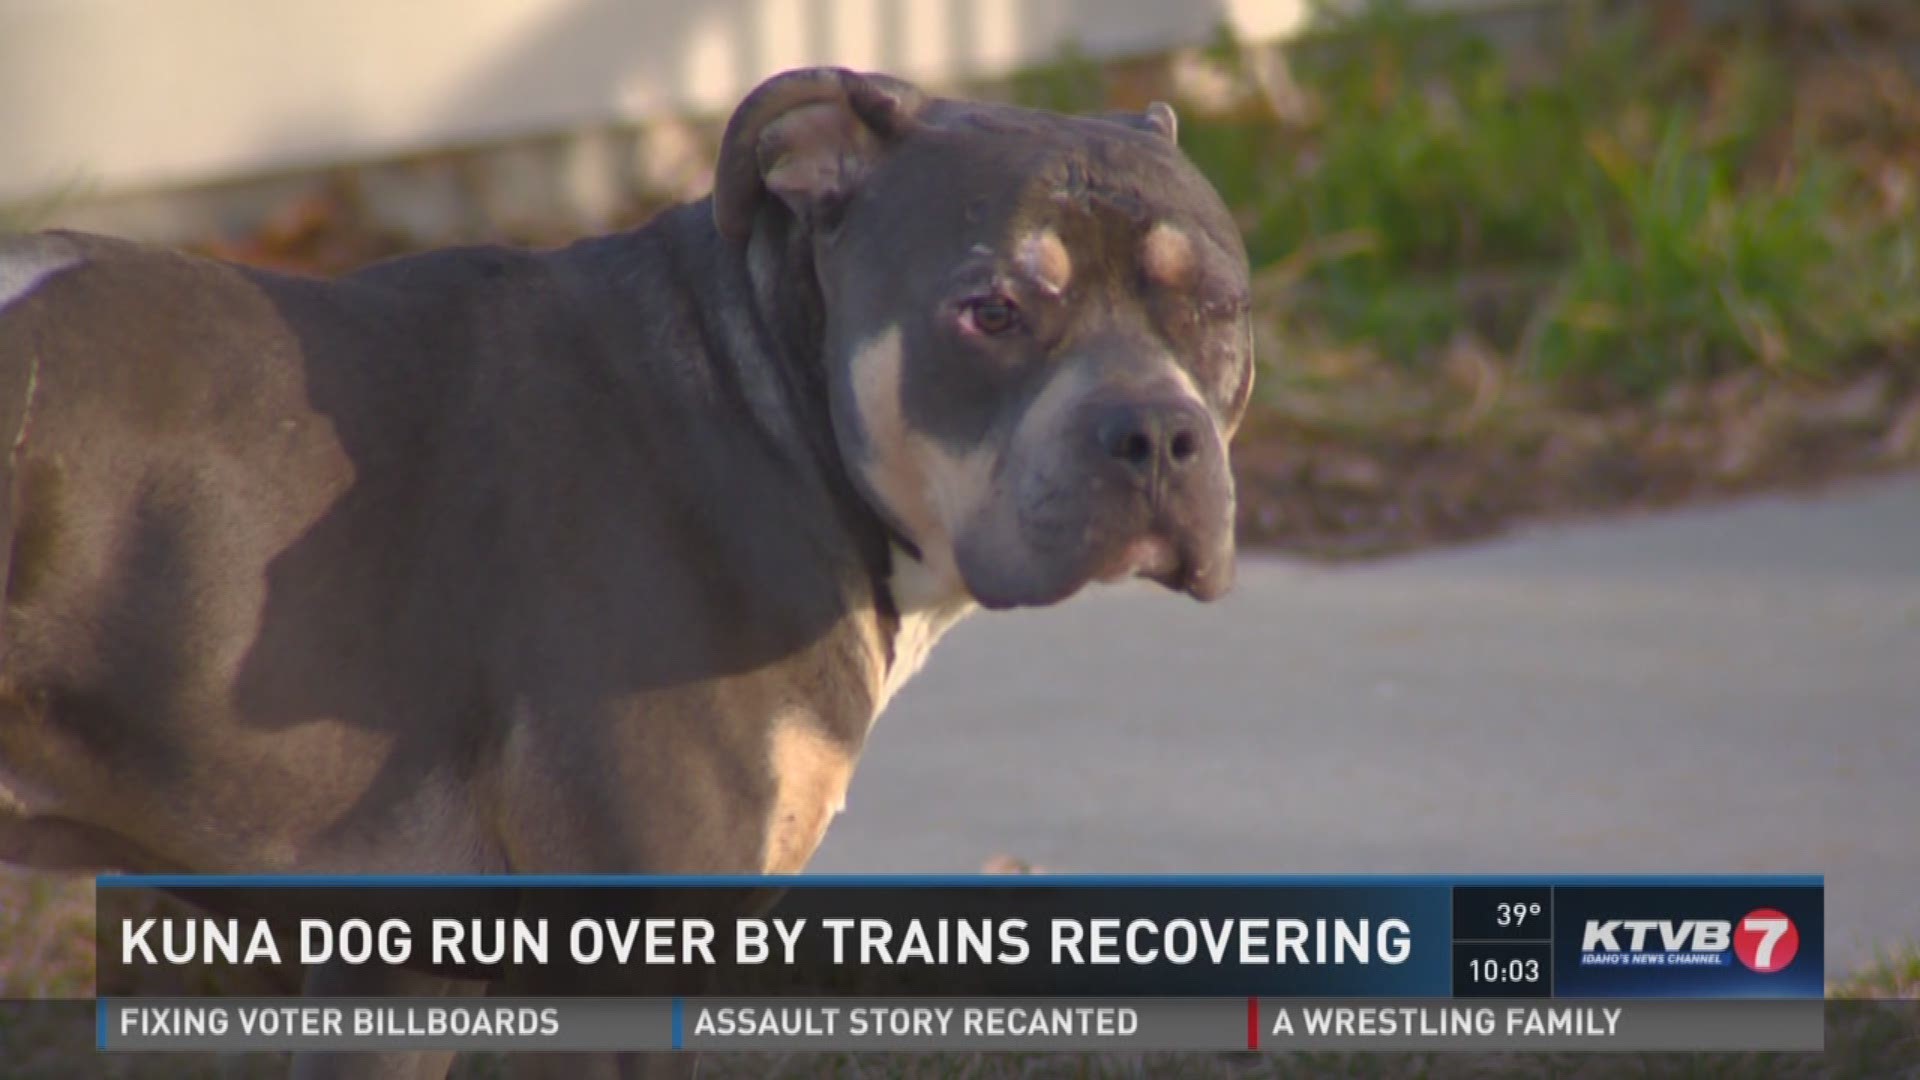 Kuna dog run over by trains recovering.